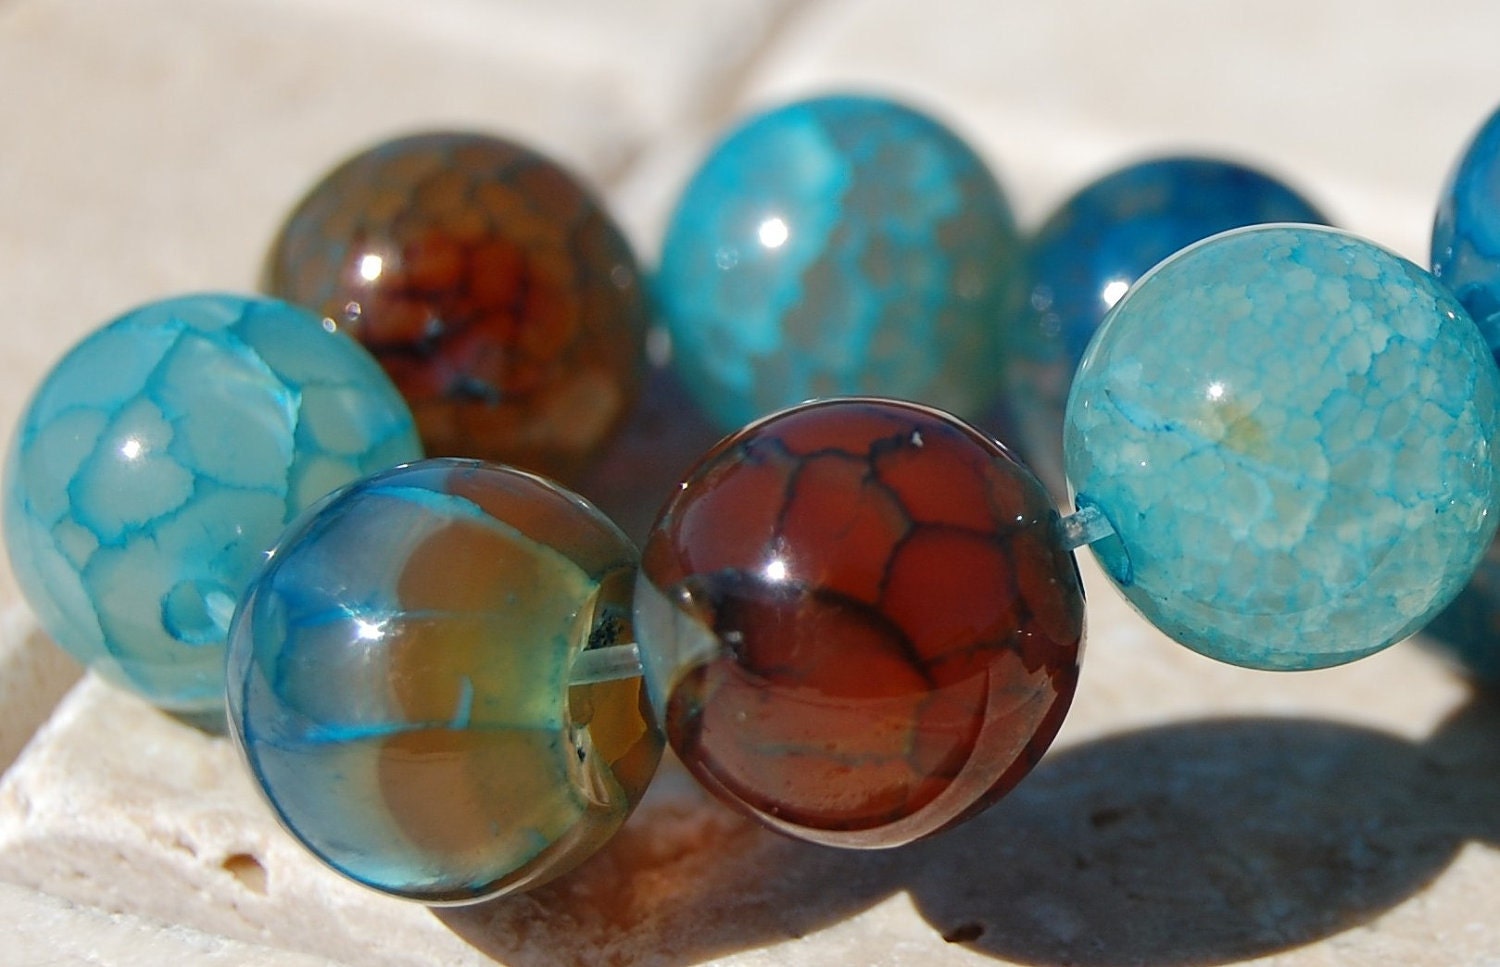 12mm Fire Agate Beads in Teal Blue Round Stones -8 inch strand